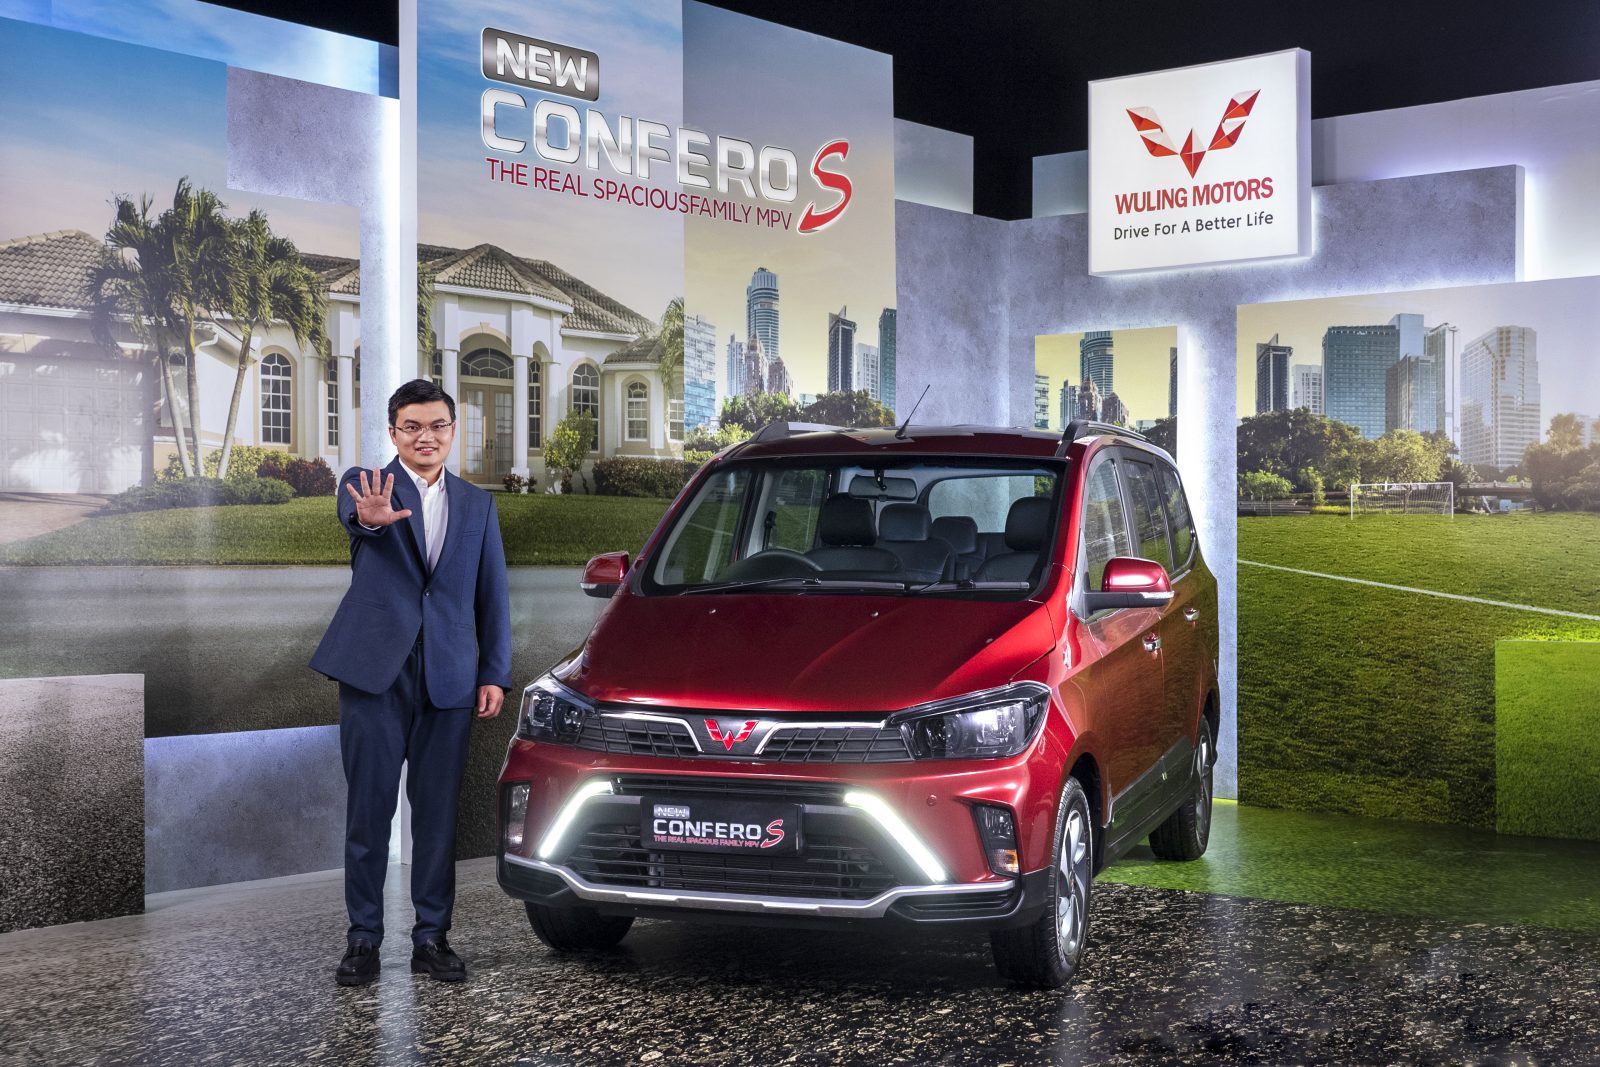 Image Wuling Presents New Confero S for Indonesian Families